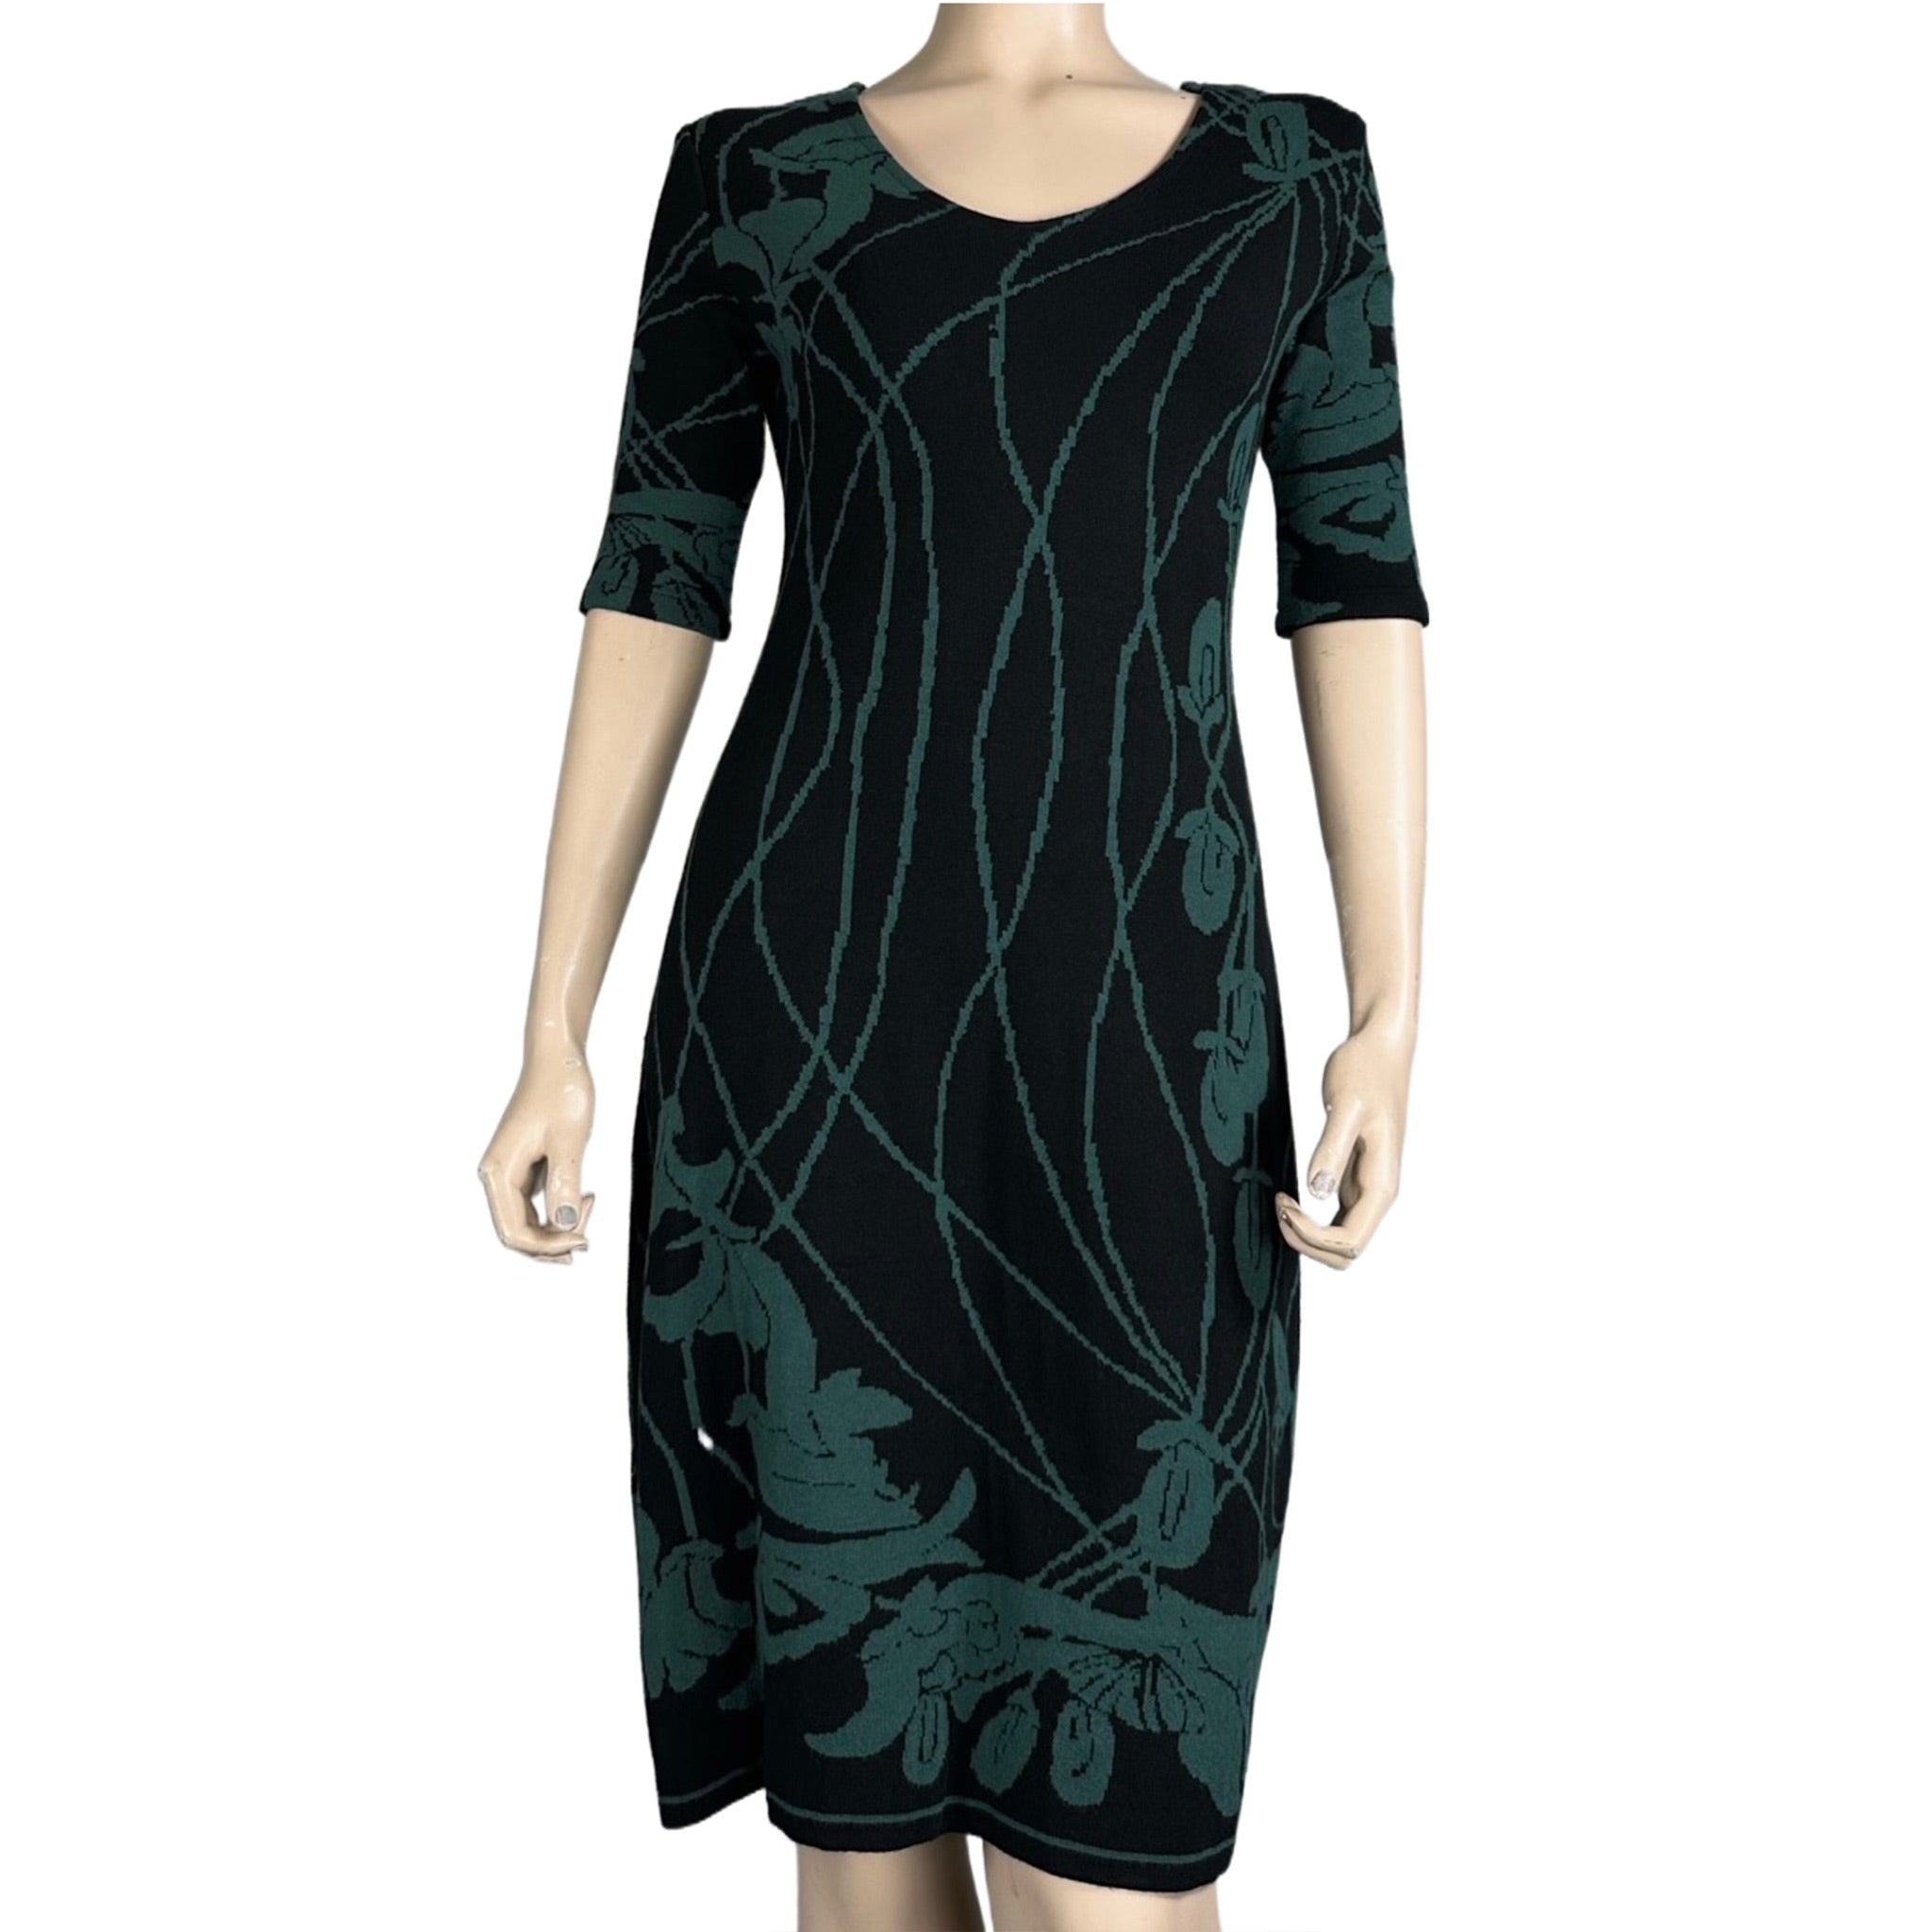 Water Lily Amanda Dress Black and Forest Green